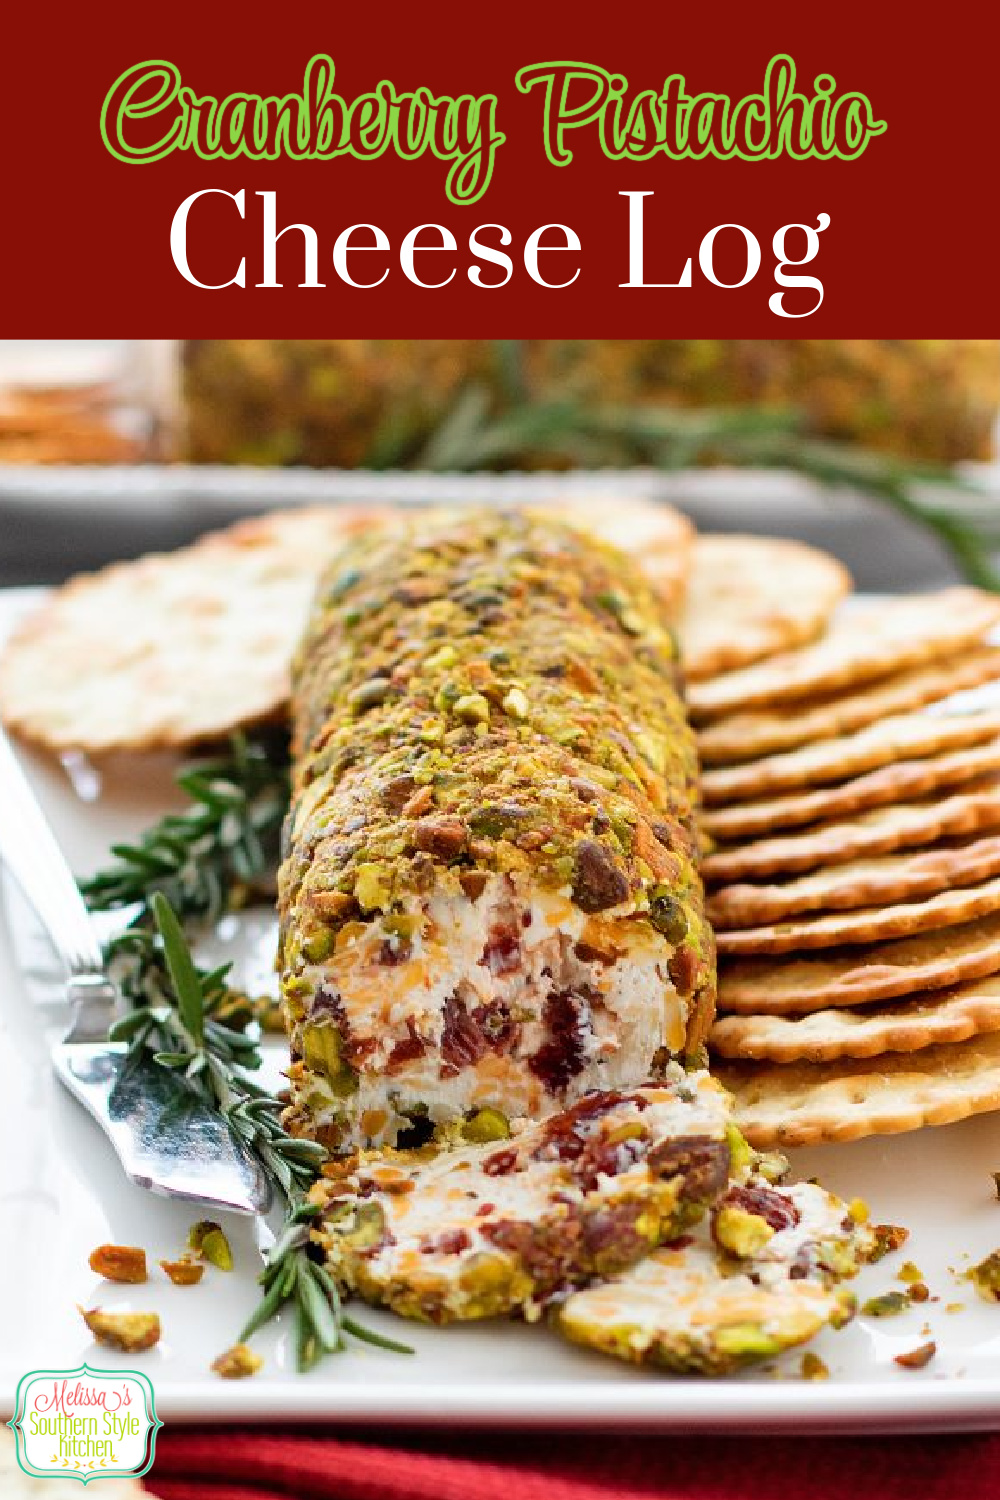 This Easy Cranberry Pistachio Cheese Log is filled with seasonal flavors and it comes together in a snap #cranberrycheeselog #cranberrypistachiocheeselog #appetizers #holidayrecipes #pistachiocheeselog #Christmasrecipes #cranberries #cheese #southernfood #southernrecipes #easyappetizerrecipes